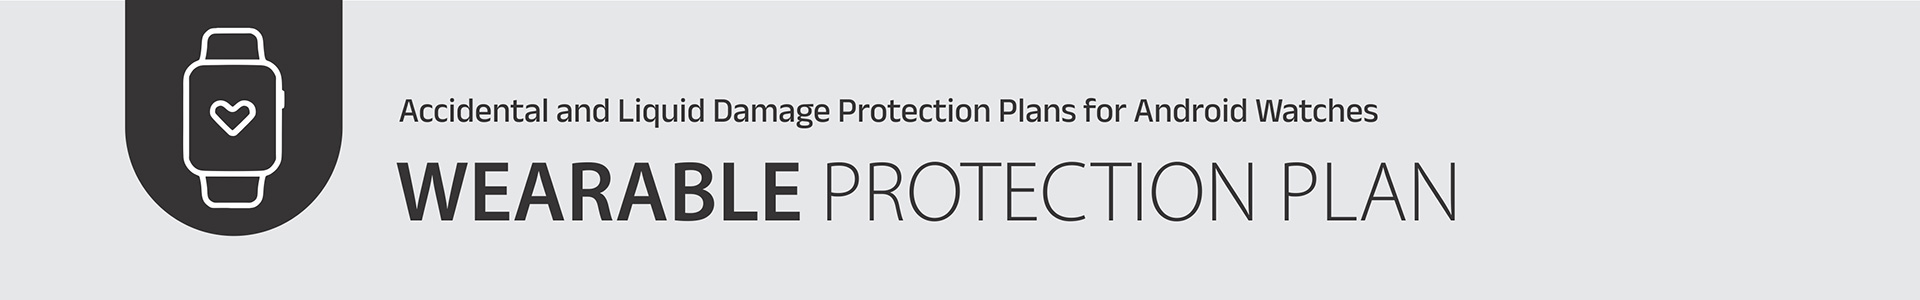 Android Wearable Protection Plan